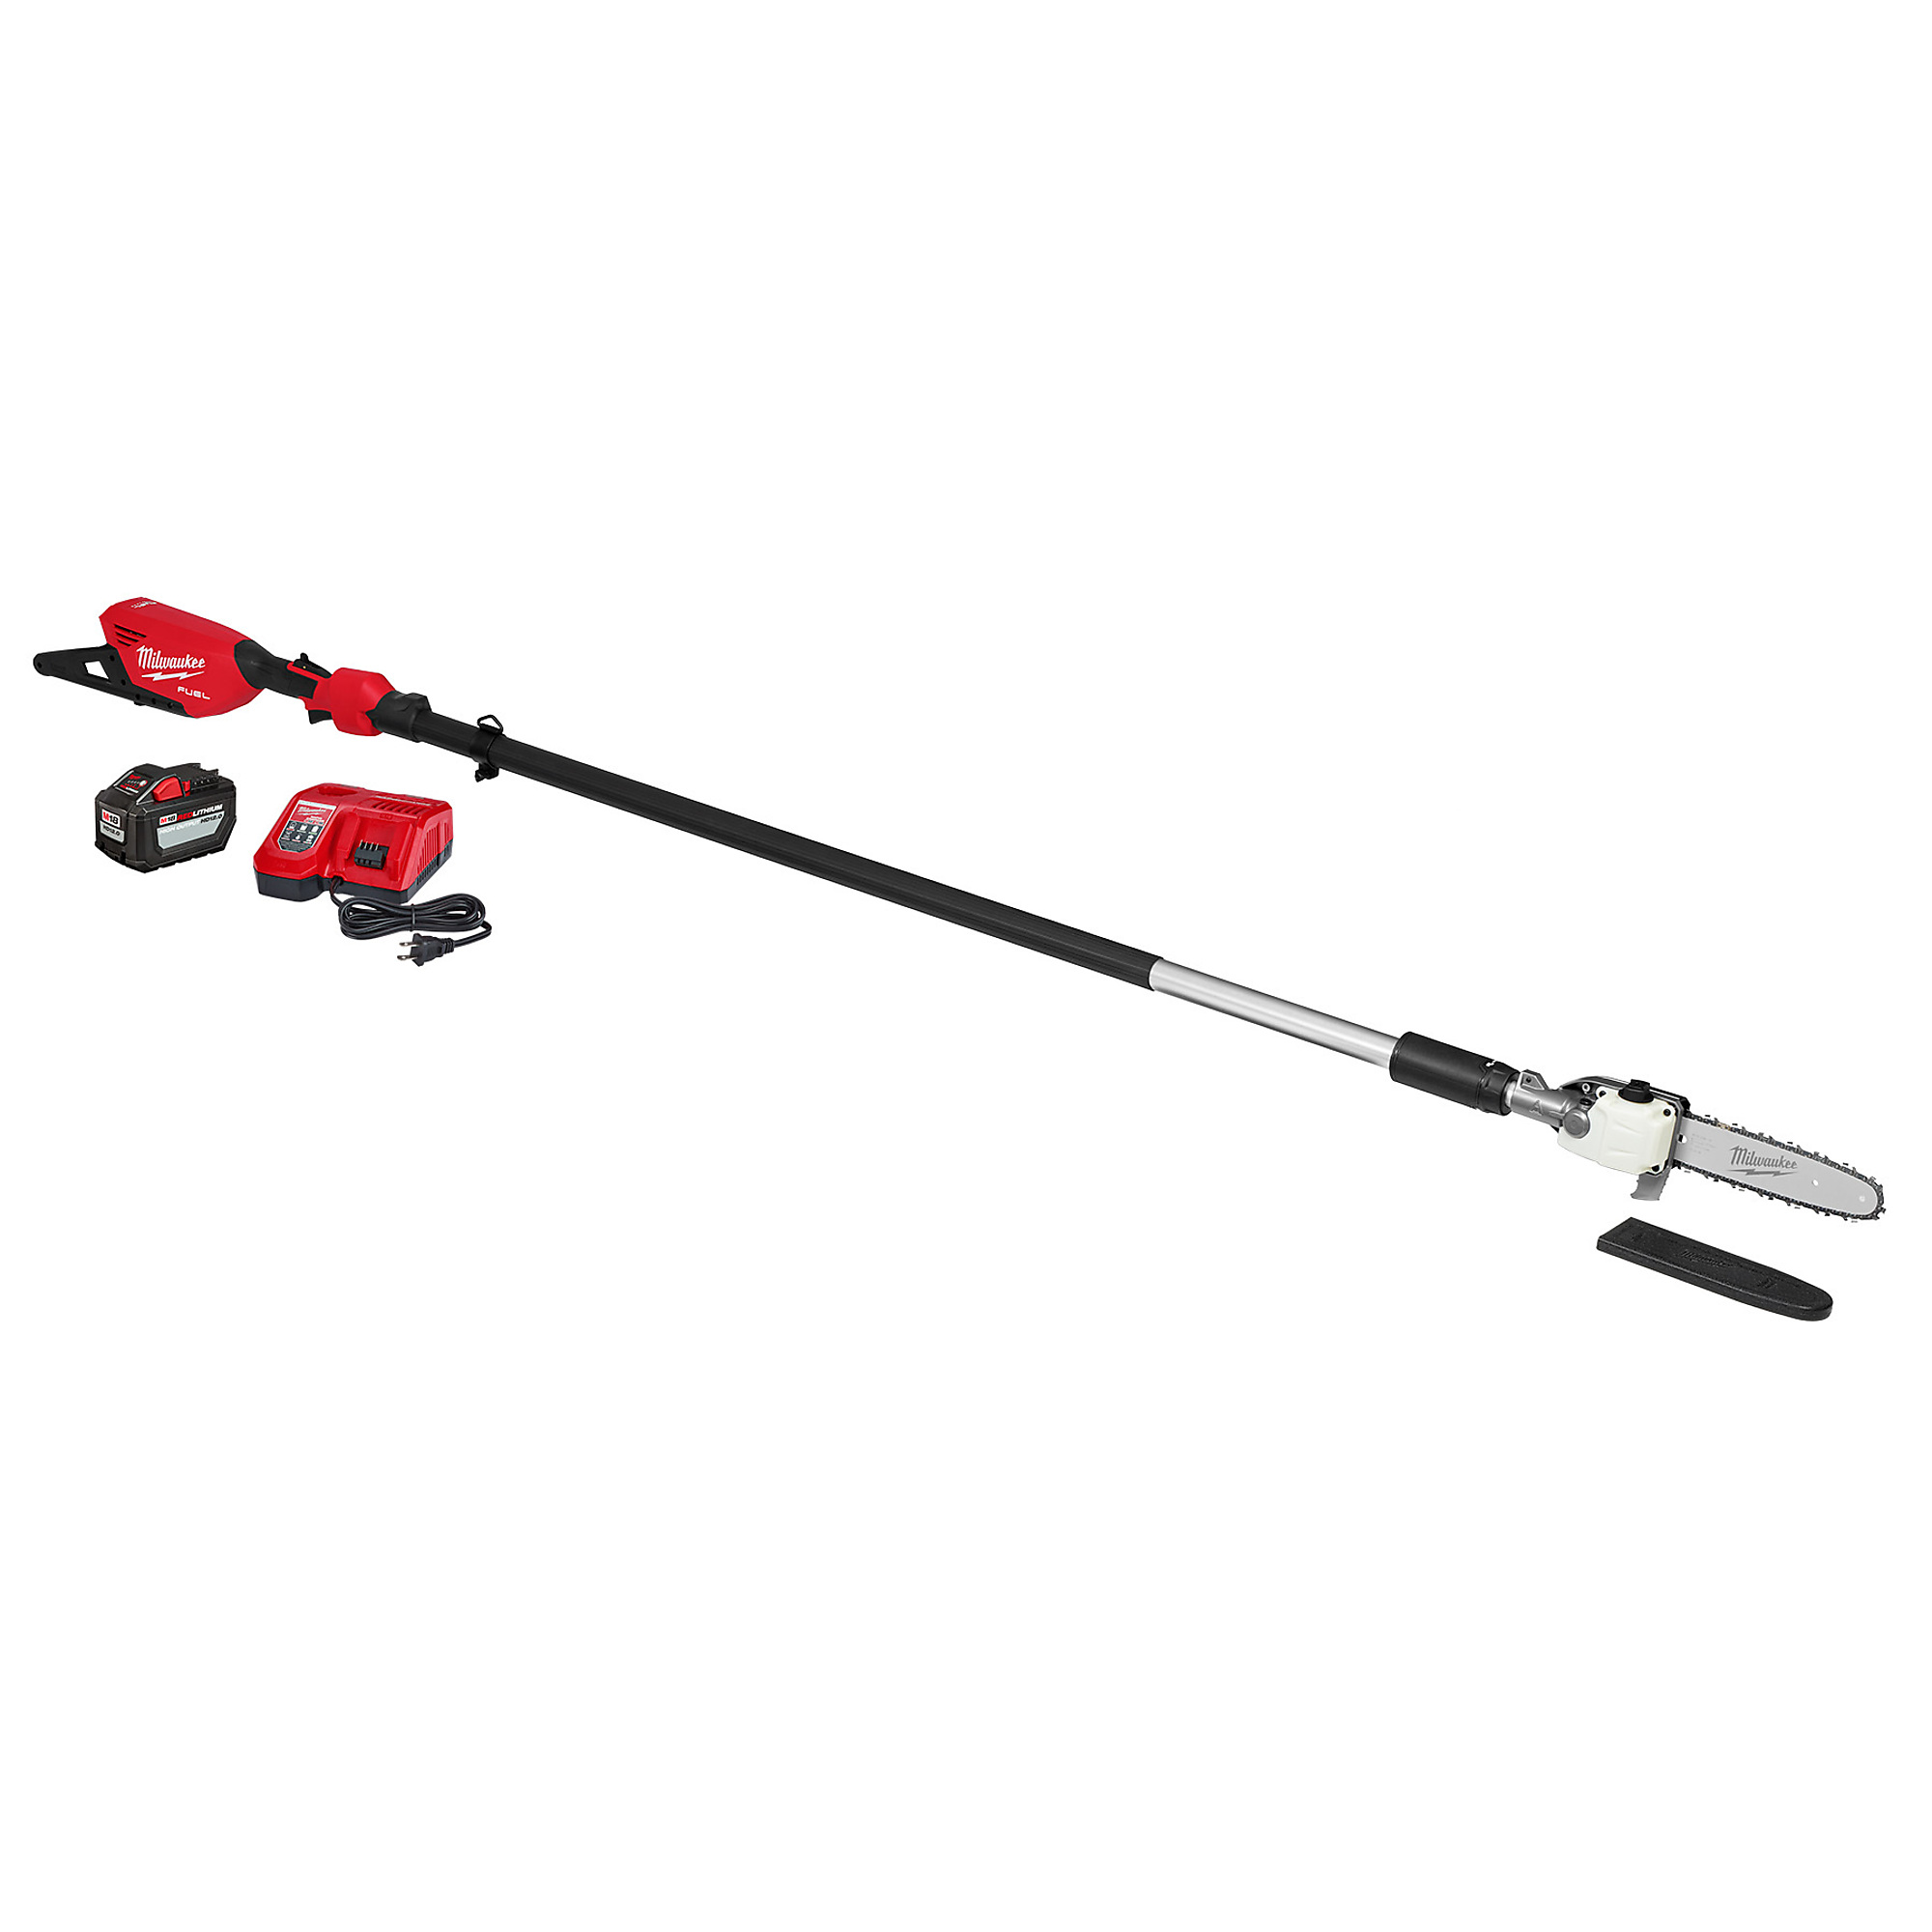 Milwaukee, M18 FUEL Telescoping Pole Saw Kit, Bar Length 10 in, Operating Height 13 ft, Model 3013-21